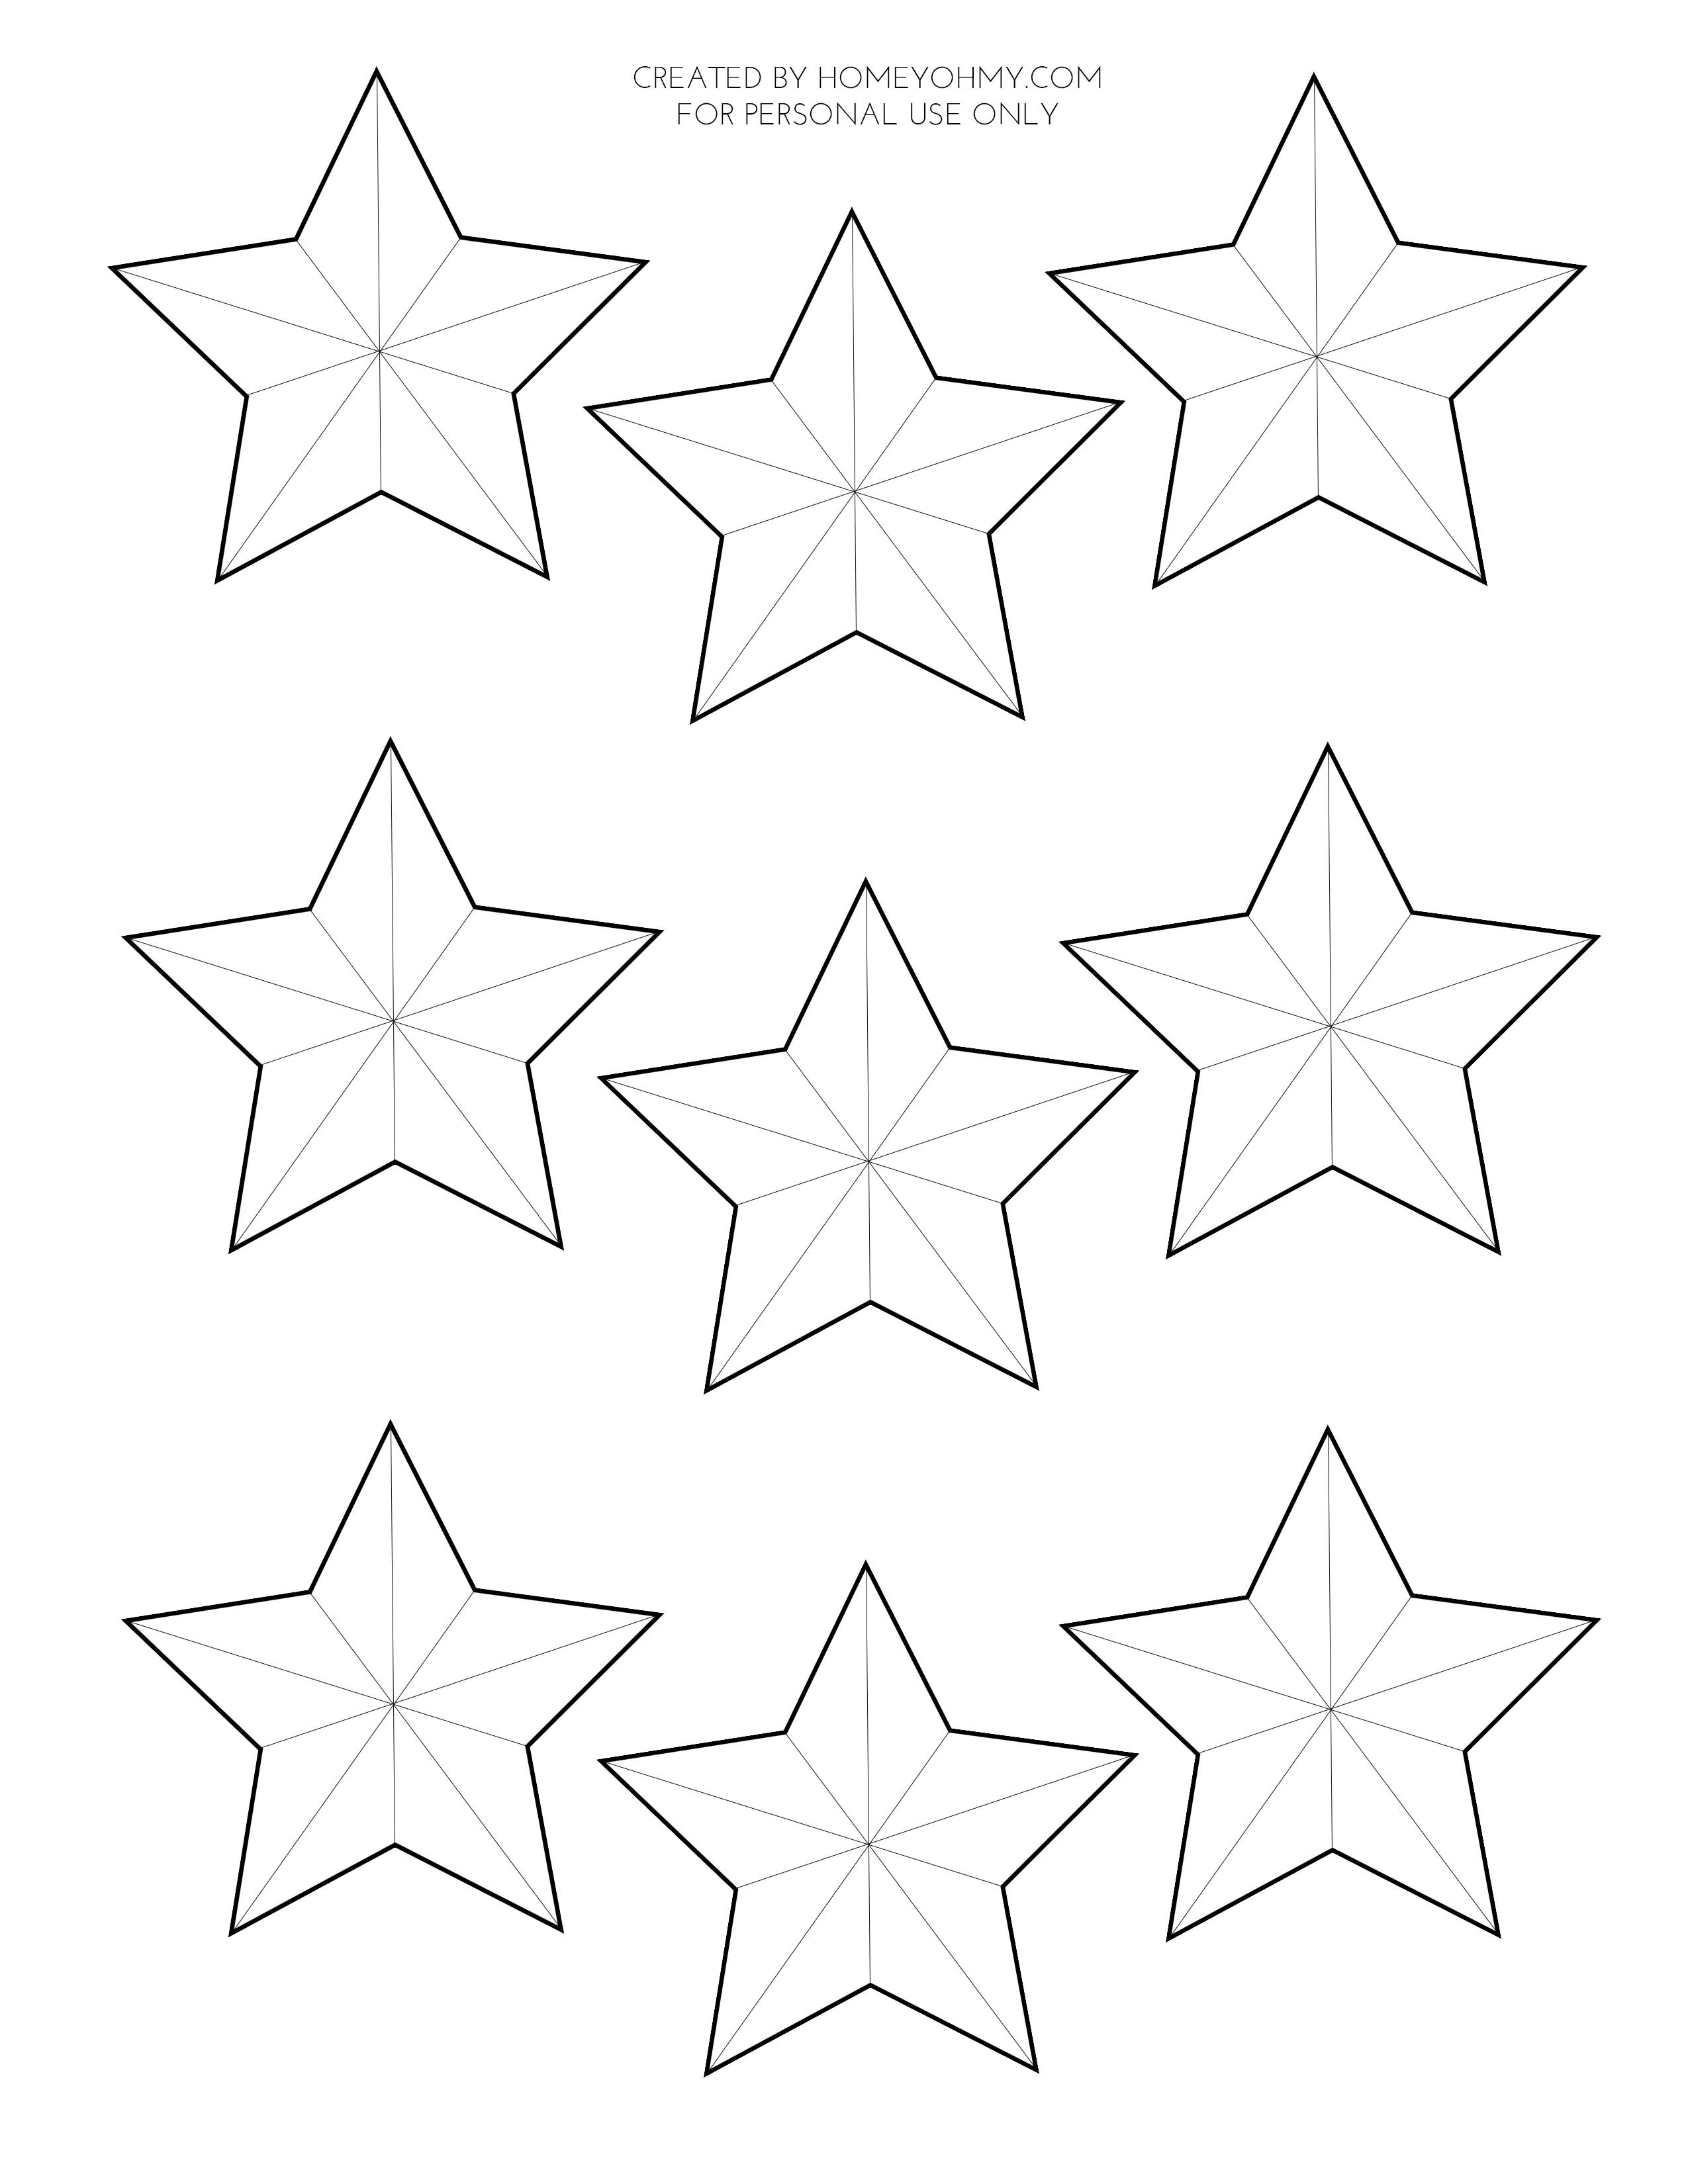 3d-paper-stars-printable-homey-oh-my